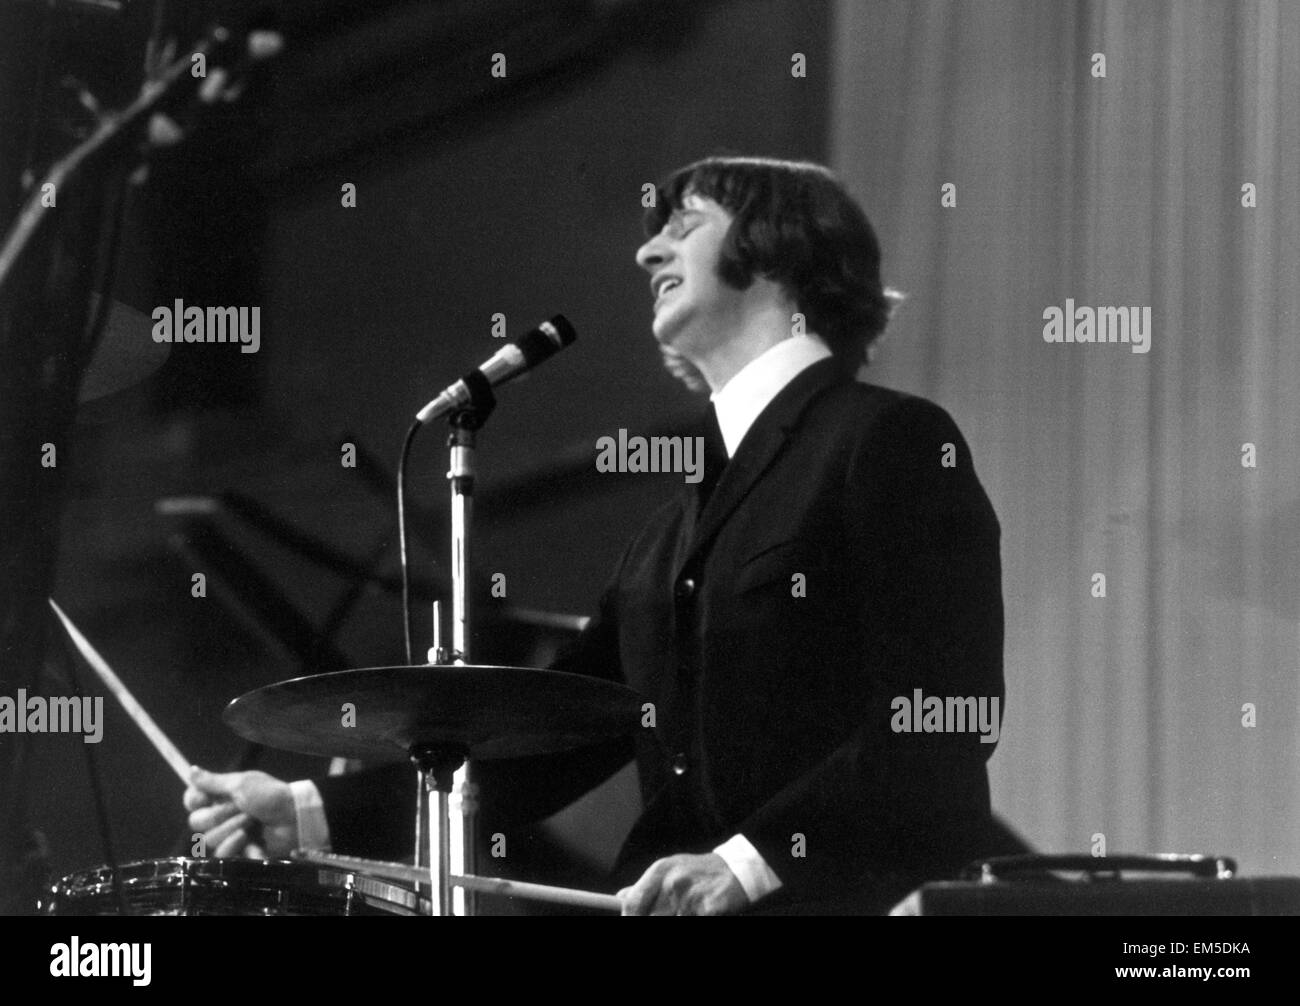 The Beatles European Tour June - July 1965. Ringo Starr Drummer Circa July 1965. Evaluation Scan Only - If you require a high resolution copy, please contact desk@mirrorpix.com Stock Photo